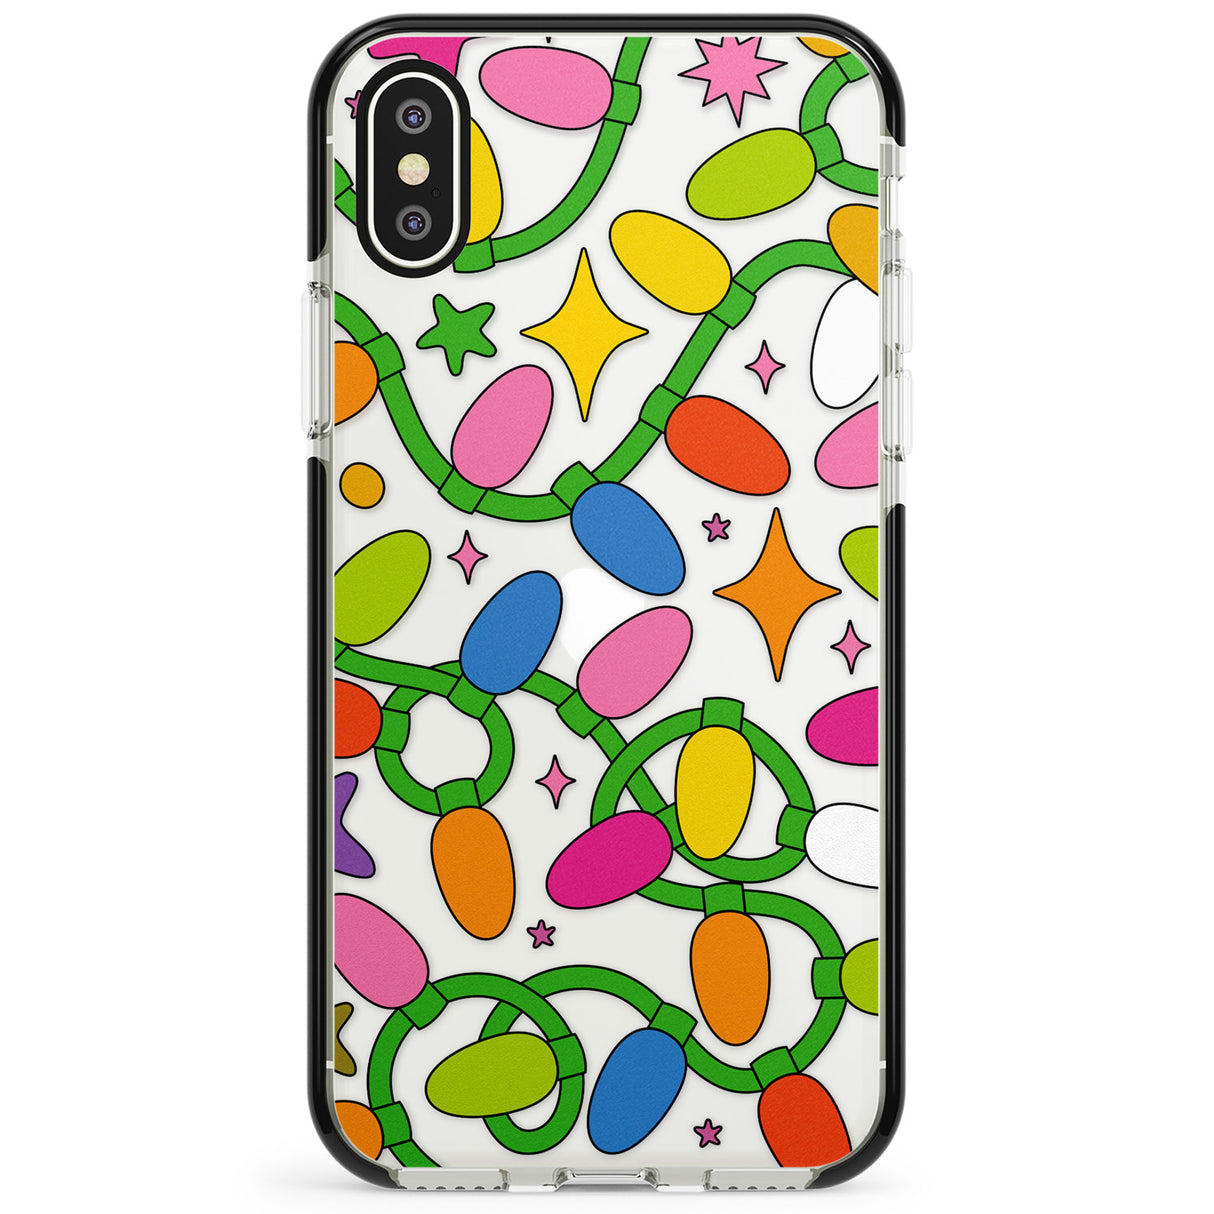 Festive Lights Pattern Phone Case for iPhone X XS Max XR